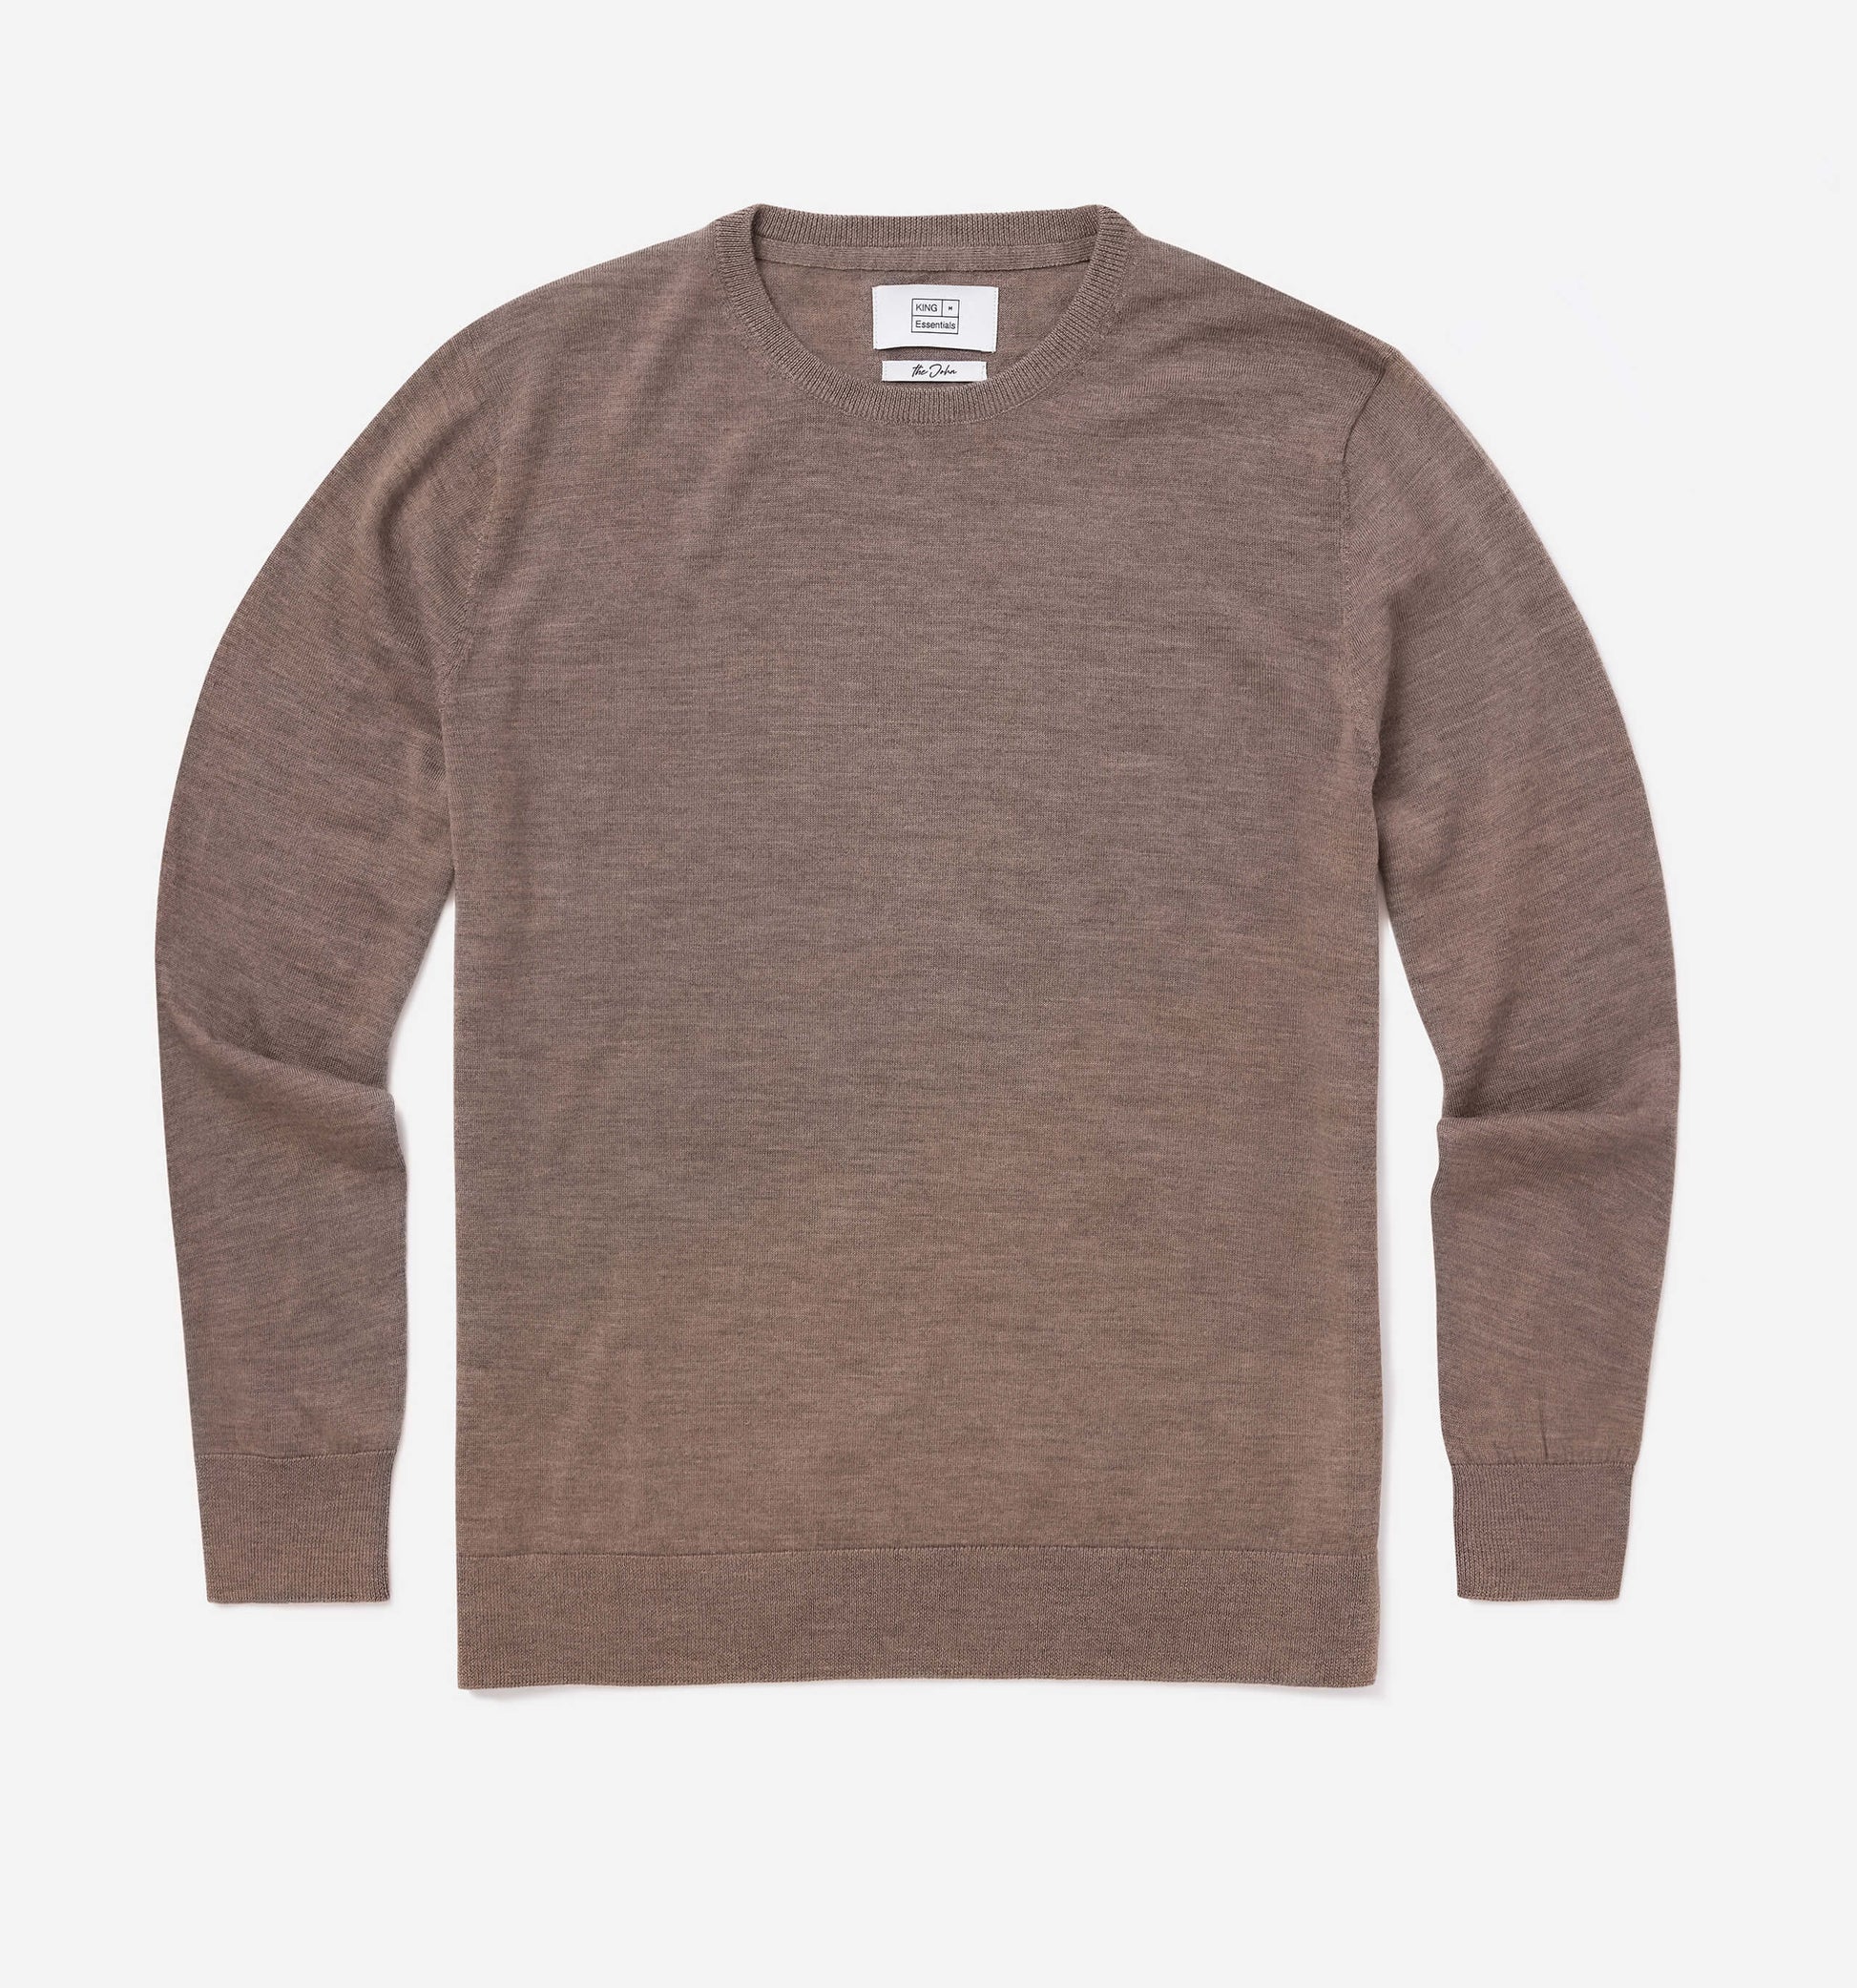 The John - Merino Wool Crewneck In Brown From King Essentials